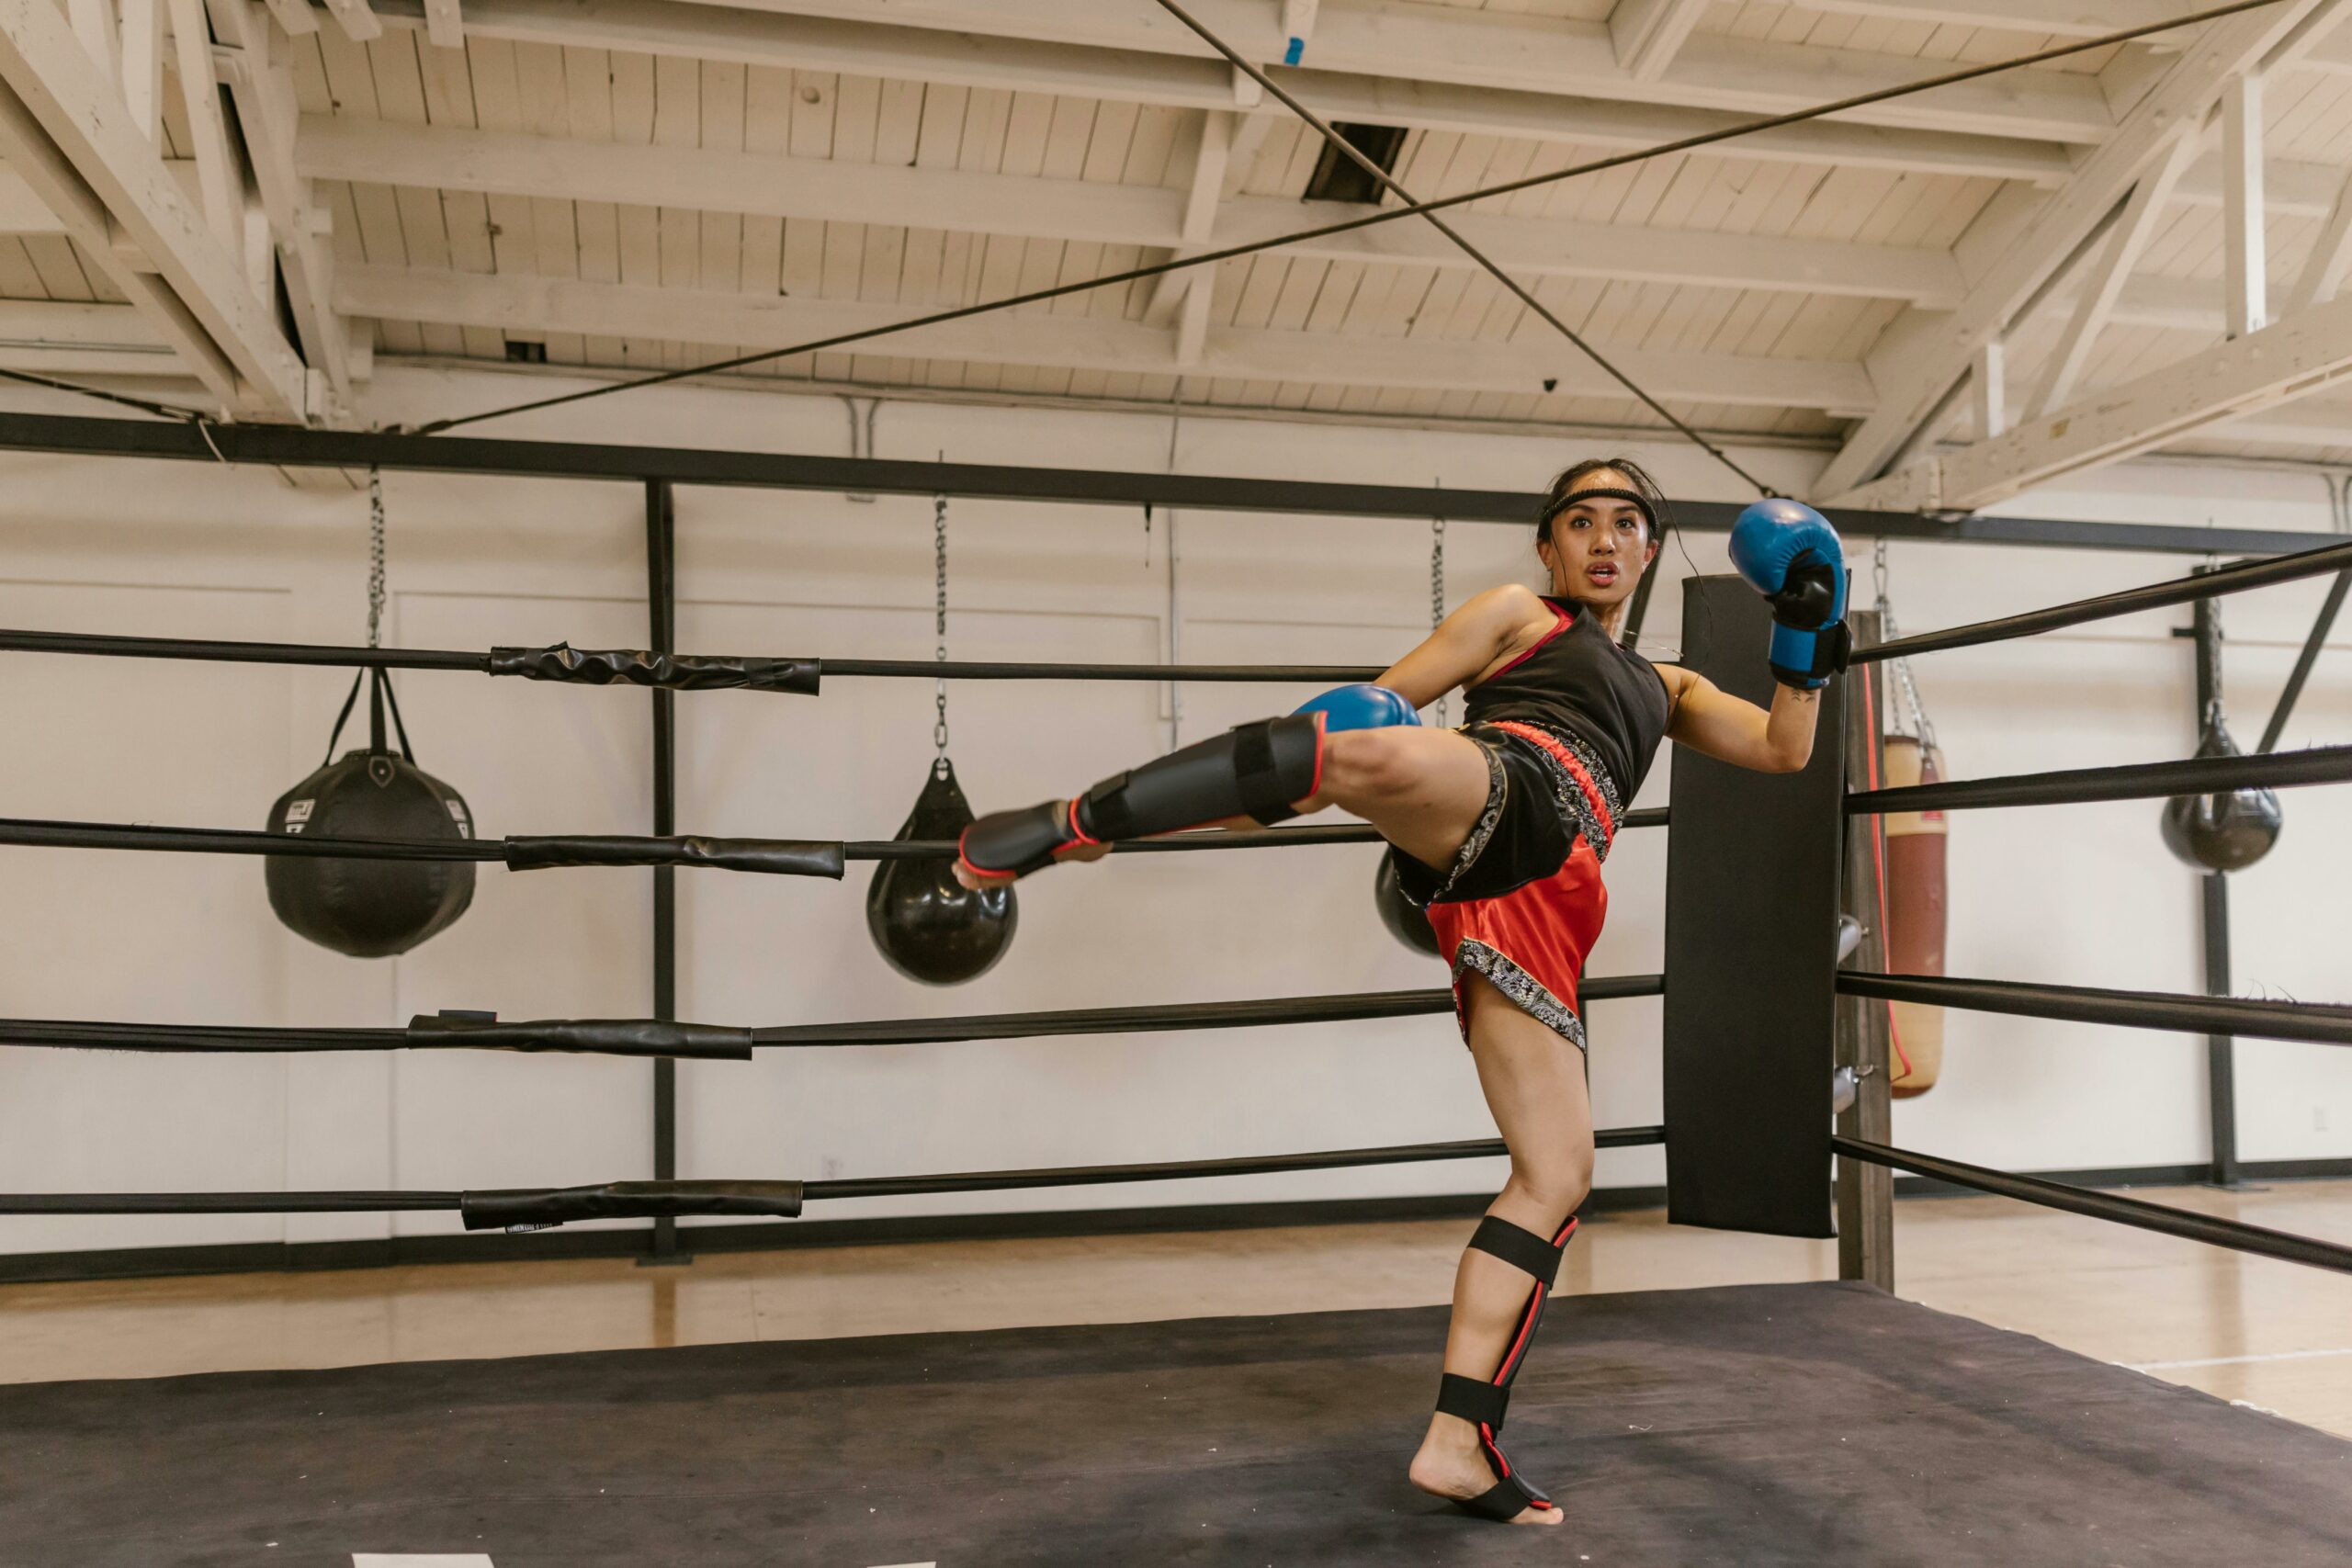 “Muay Thai & Kickboxing for Self-Defense | Switch Fitness SD”